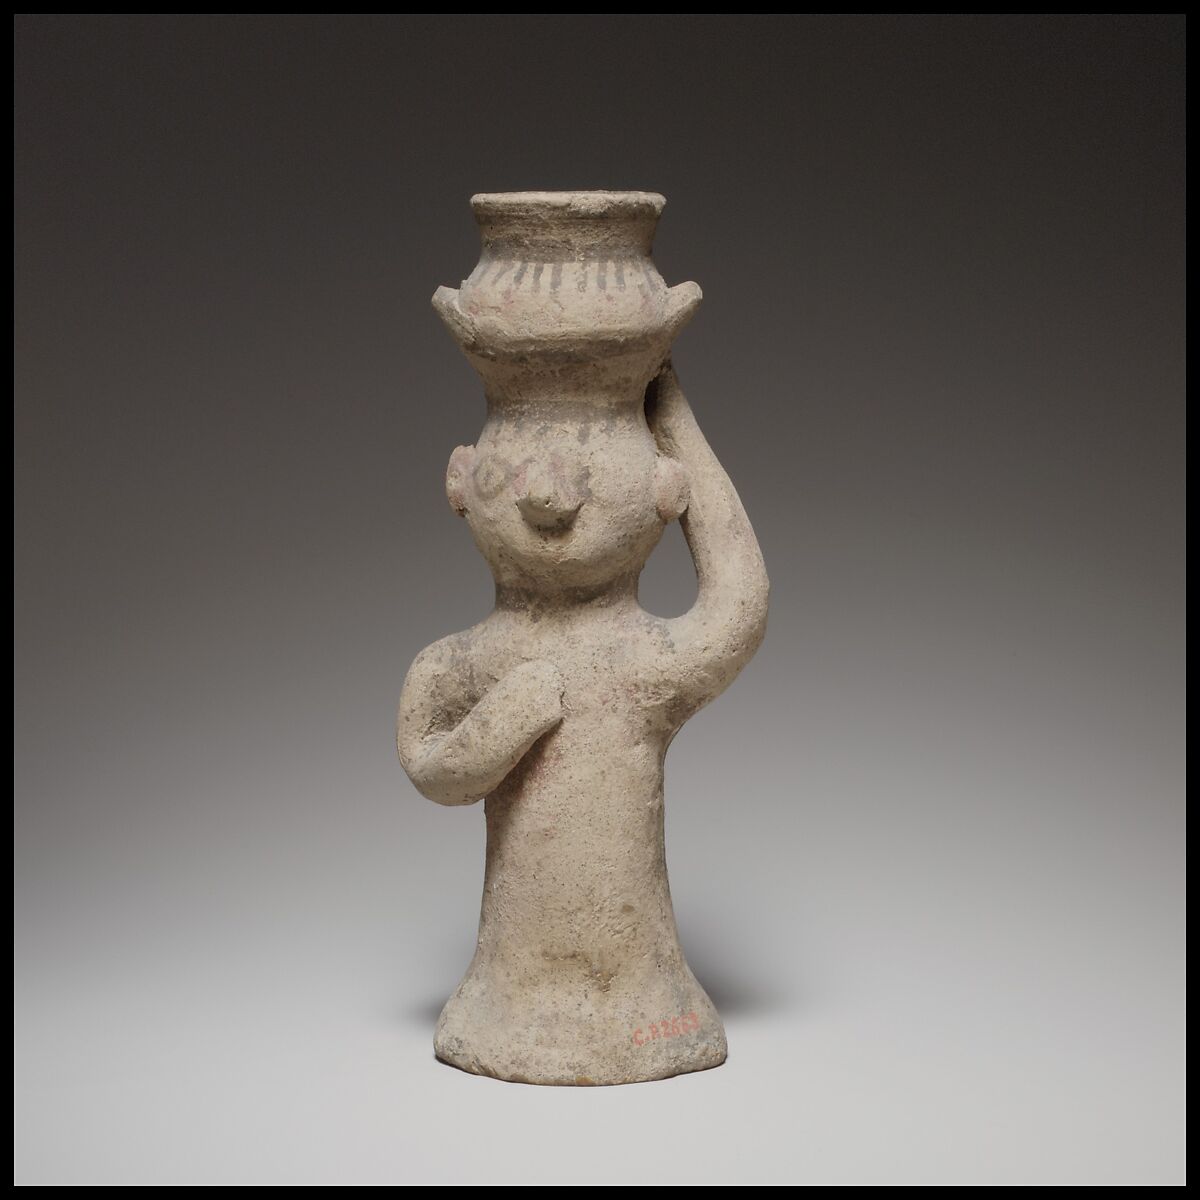 Standing female figurine holding an amphora on her head, Terracotta, Cypriot 